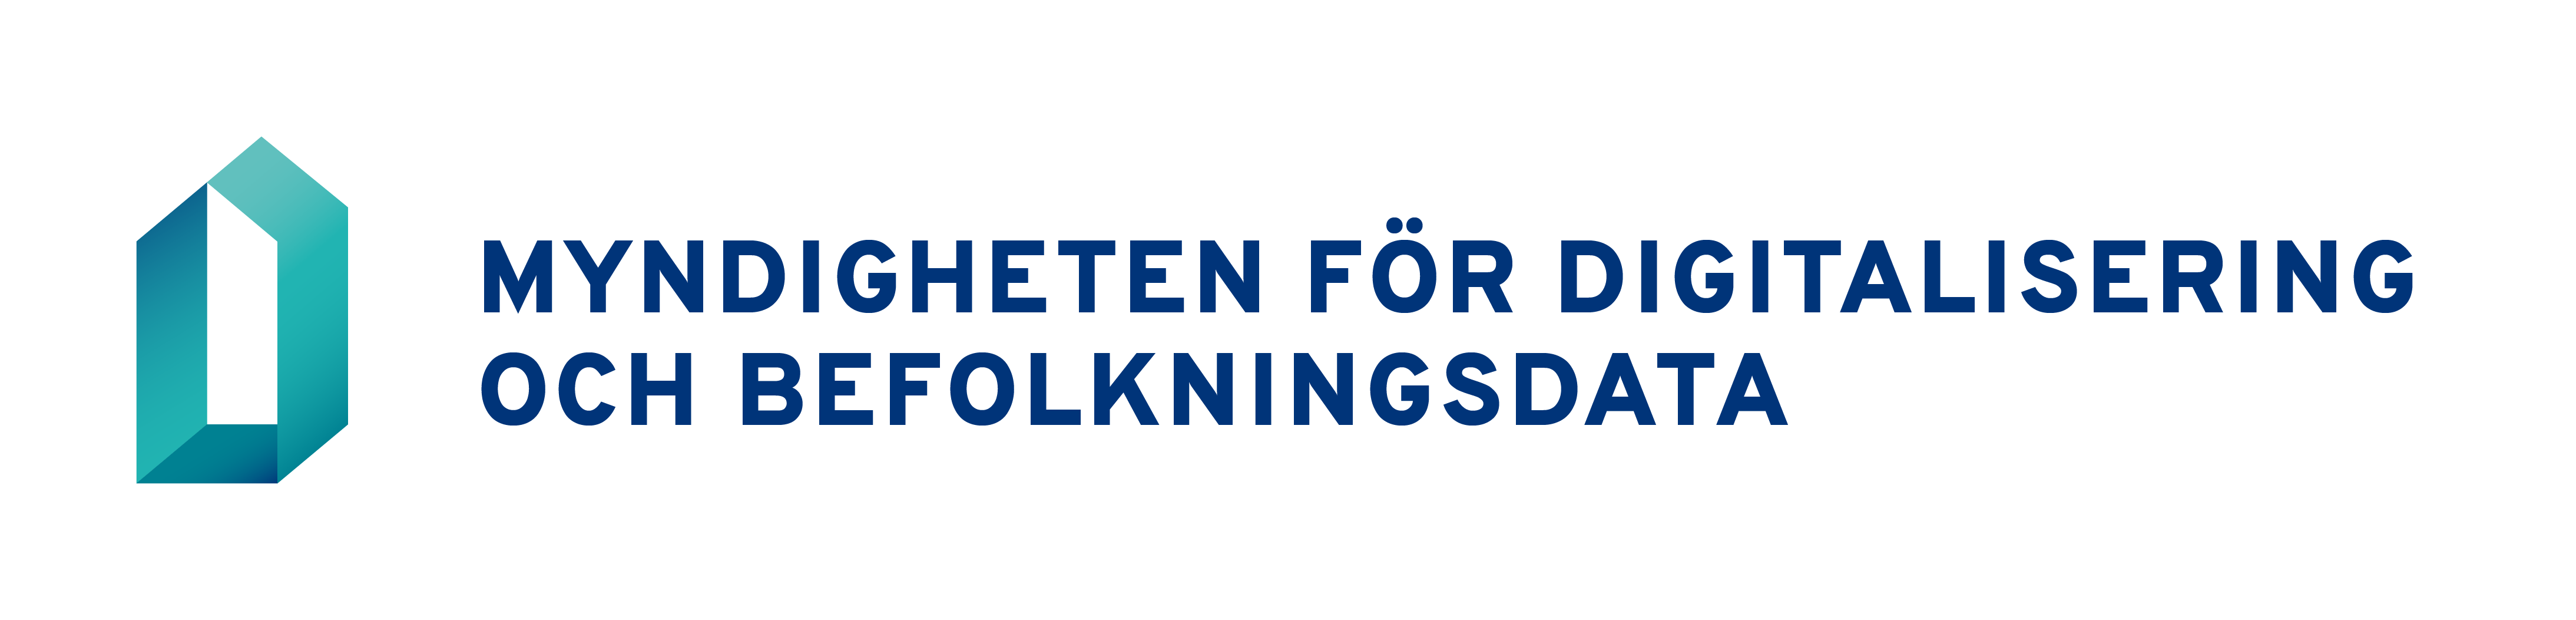 Digital and Population Data Services Agency’s logo in Swedish, horizontal format